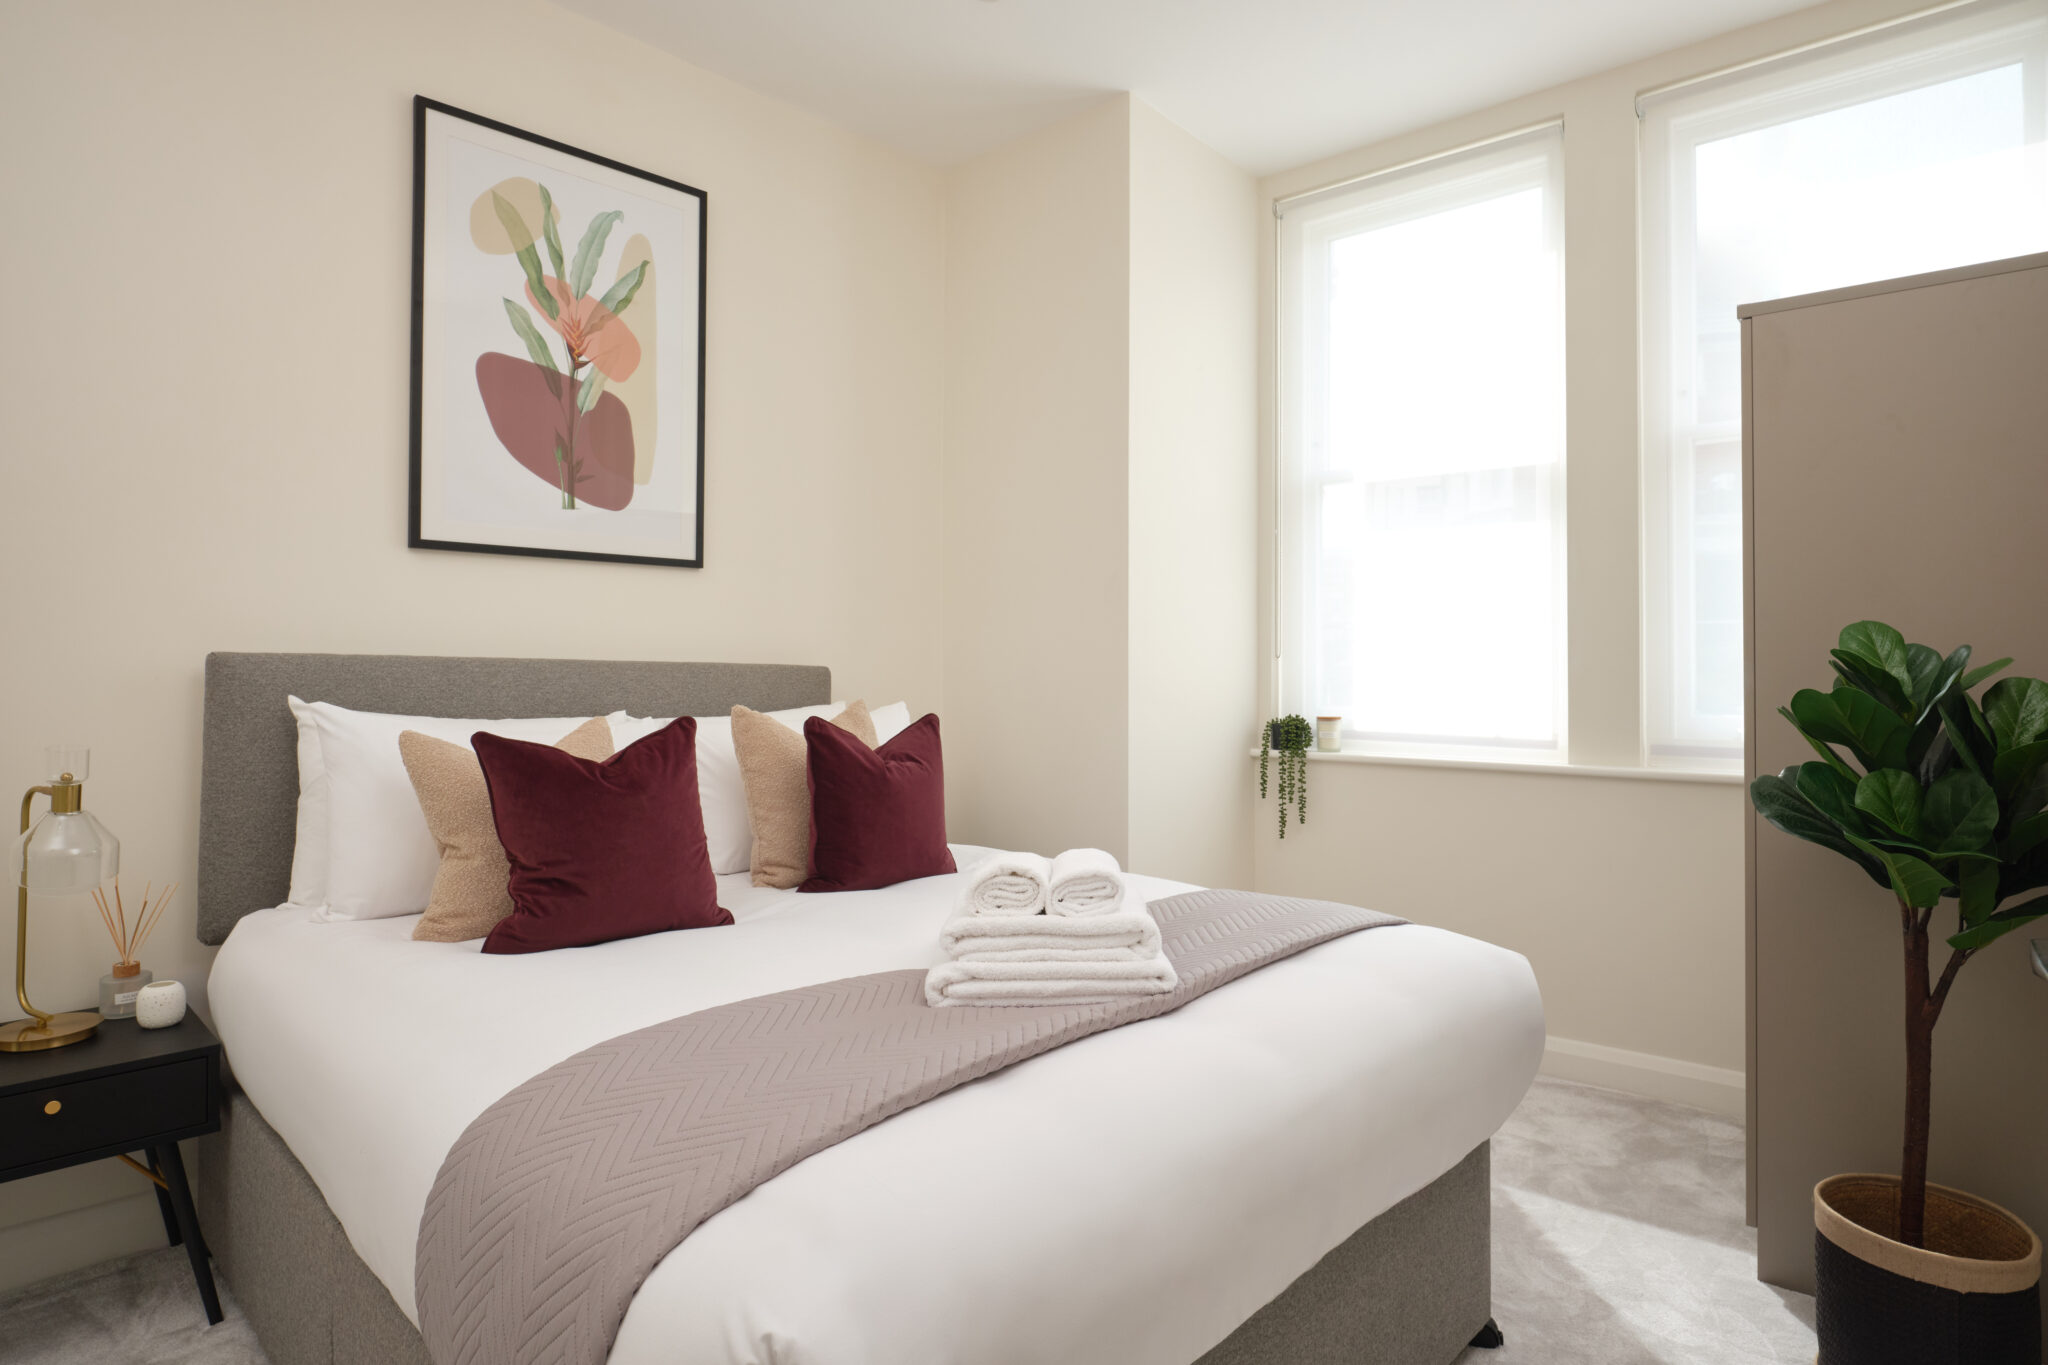 West London Serviced Accommodations Hestercombe House is Fully equipped kitchens, and cozy bedrooms ensure a comfortable stay. Book Now 0208 691 3920